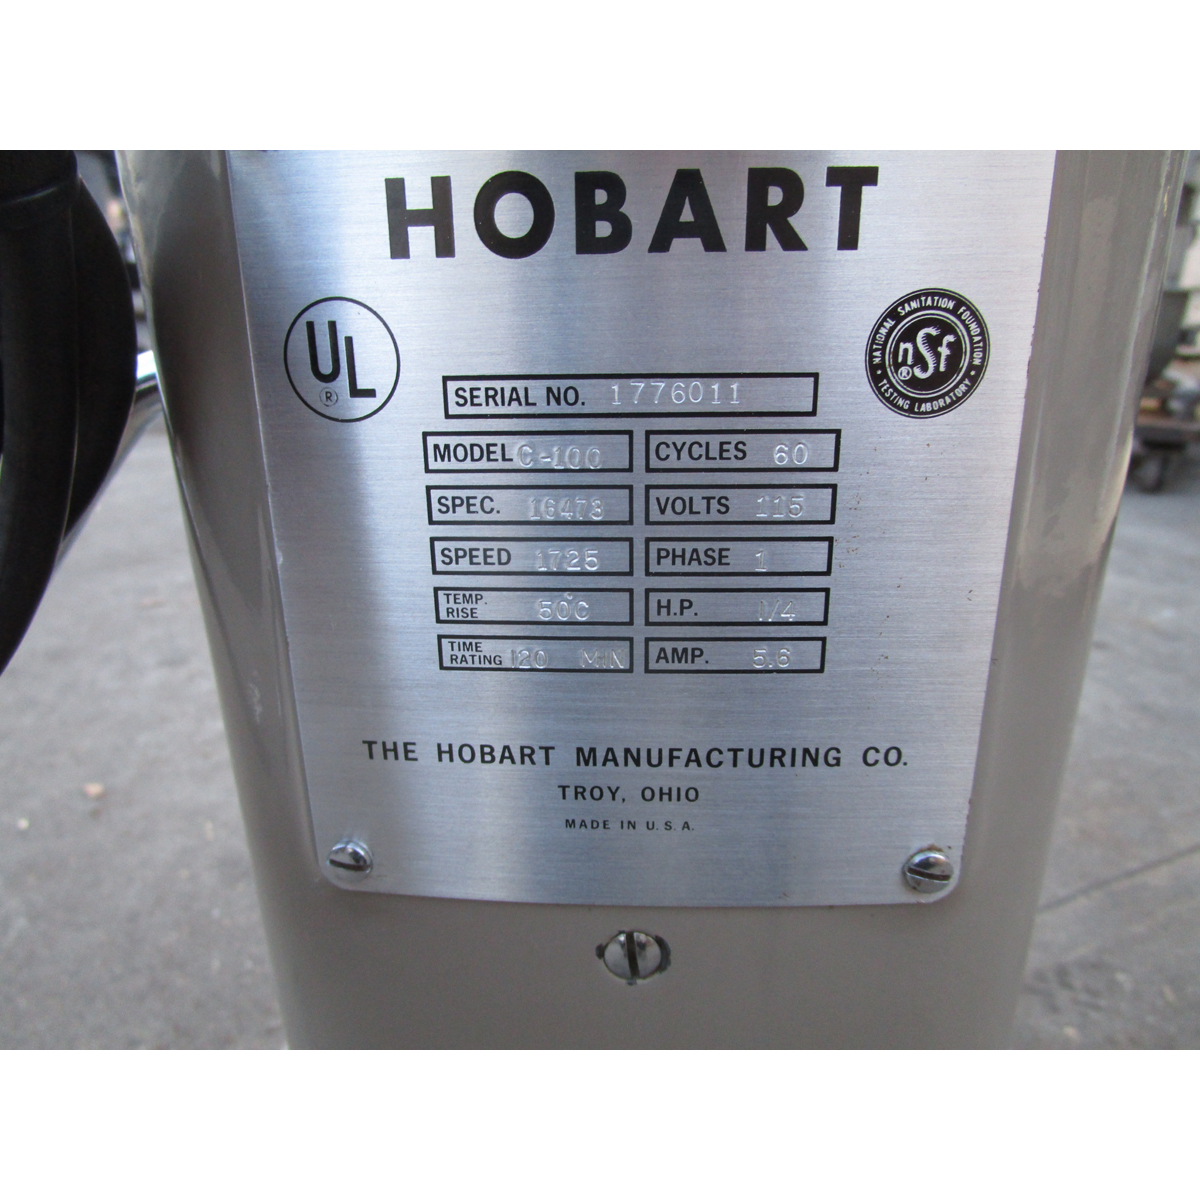 Hobart 10 Quart C100 Mixer With grinder Attachment, Great Condition image 3